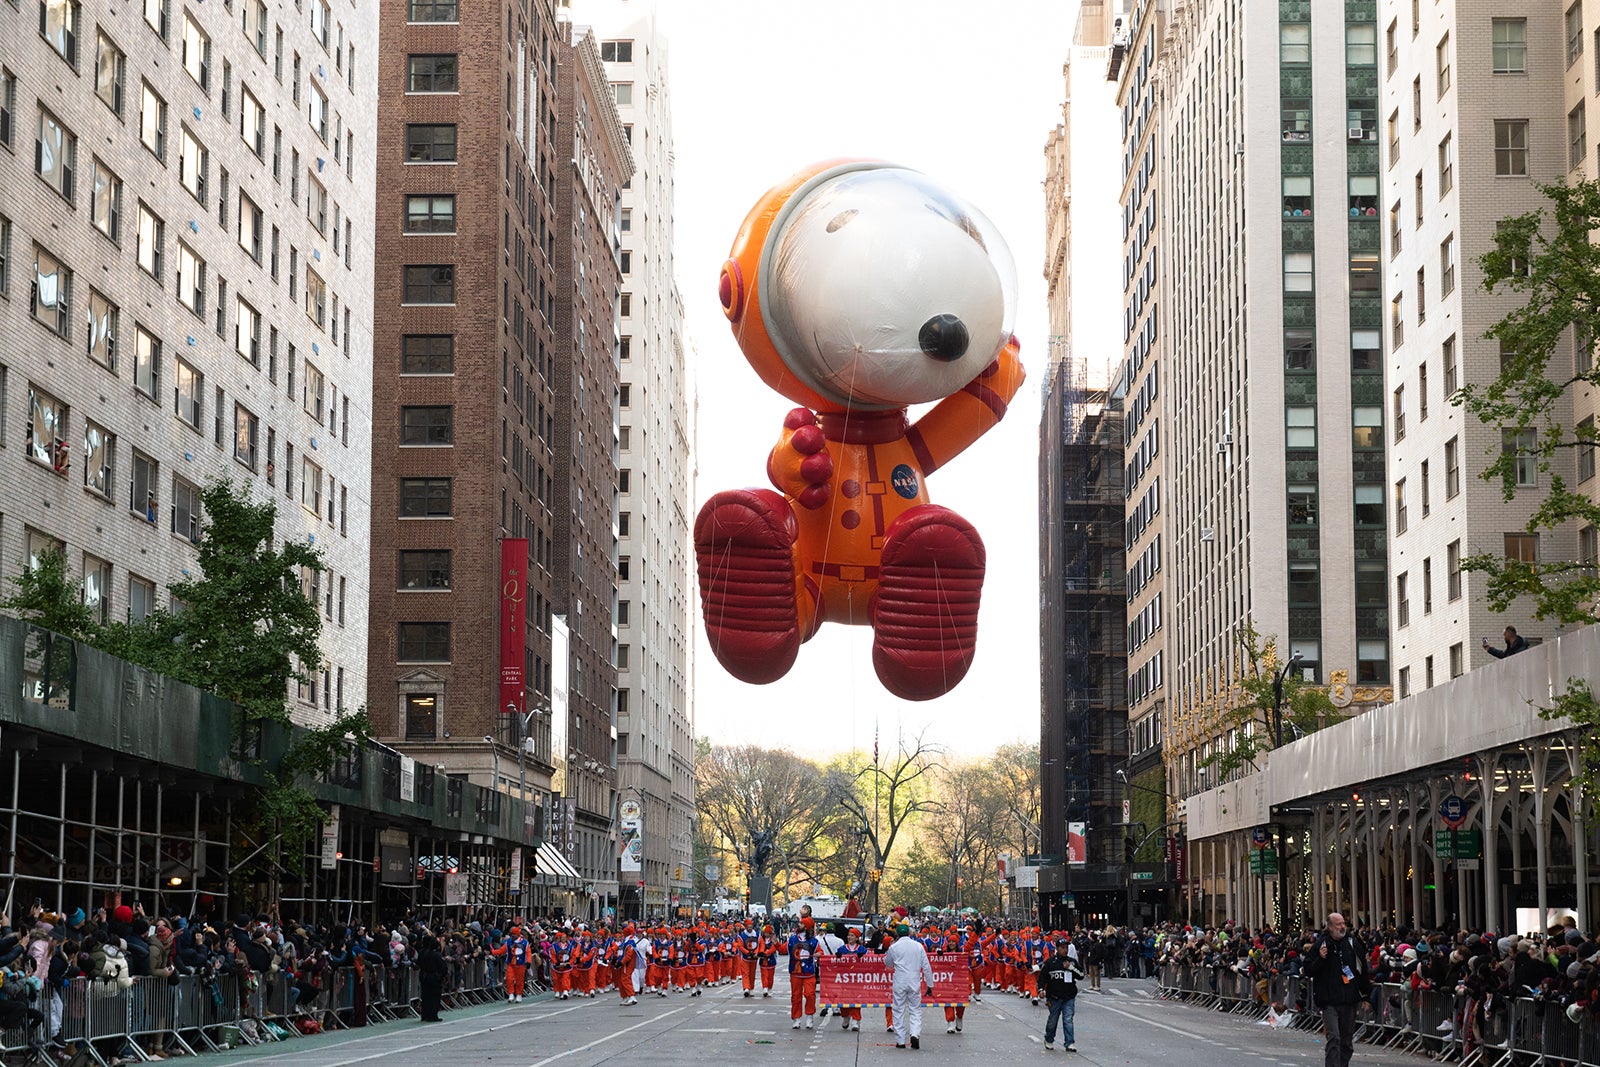 A view of the 'Astronaut Snoopy' balloon at the 2022 Macy's Thanksgiving Day Parade